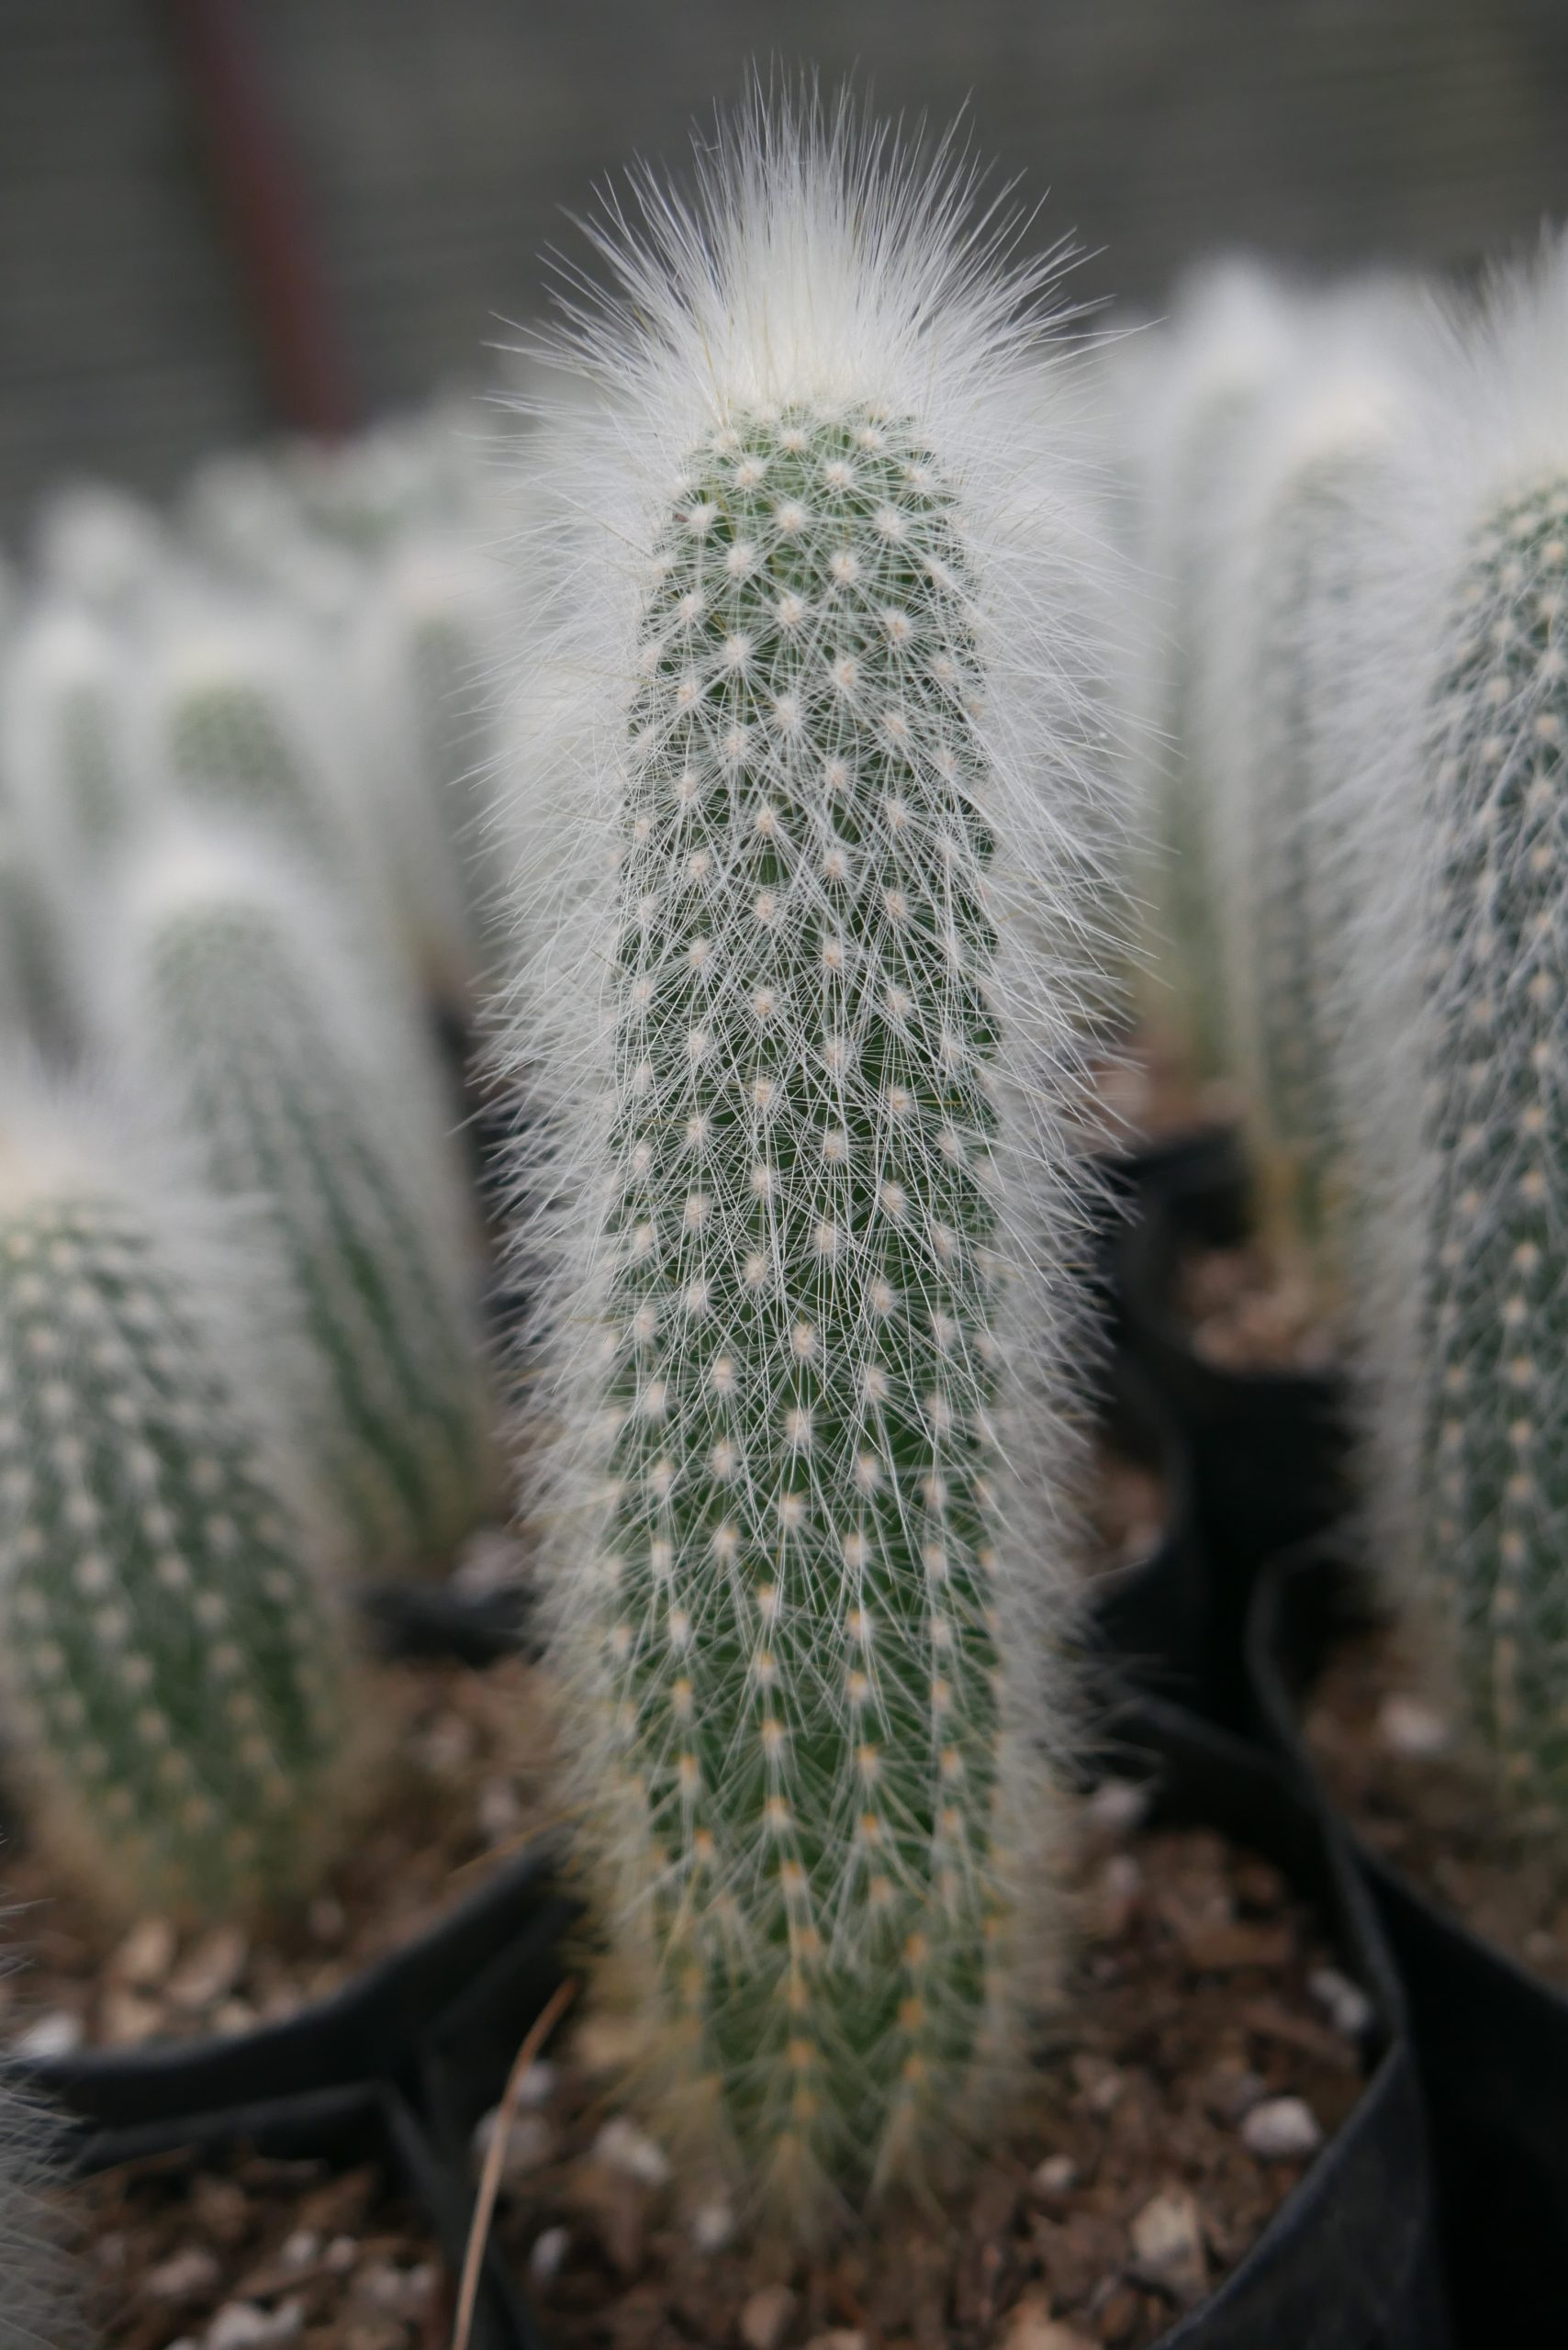 The Ultimate Guide to Caring for Your Cactus – A Prickly Love Story